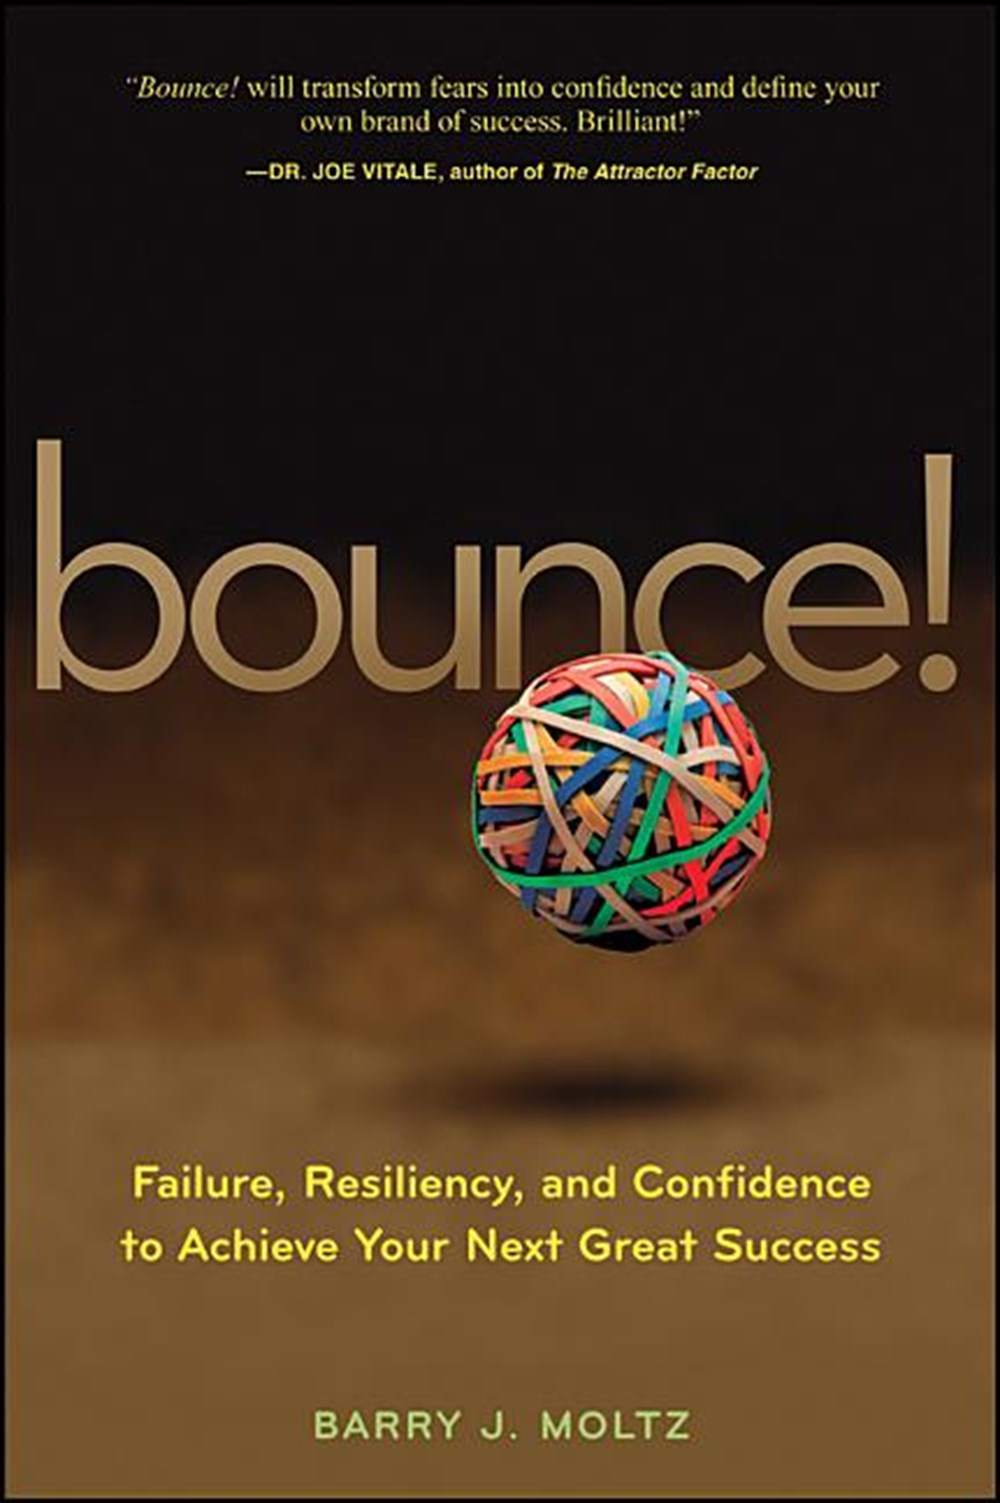 Bounce! Failure, Resiliency, and Confidence to Achieve Your Next Great Success